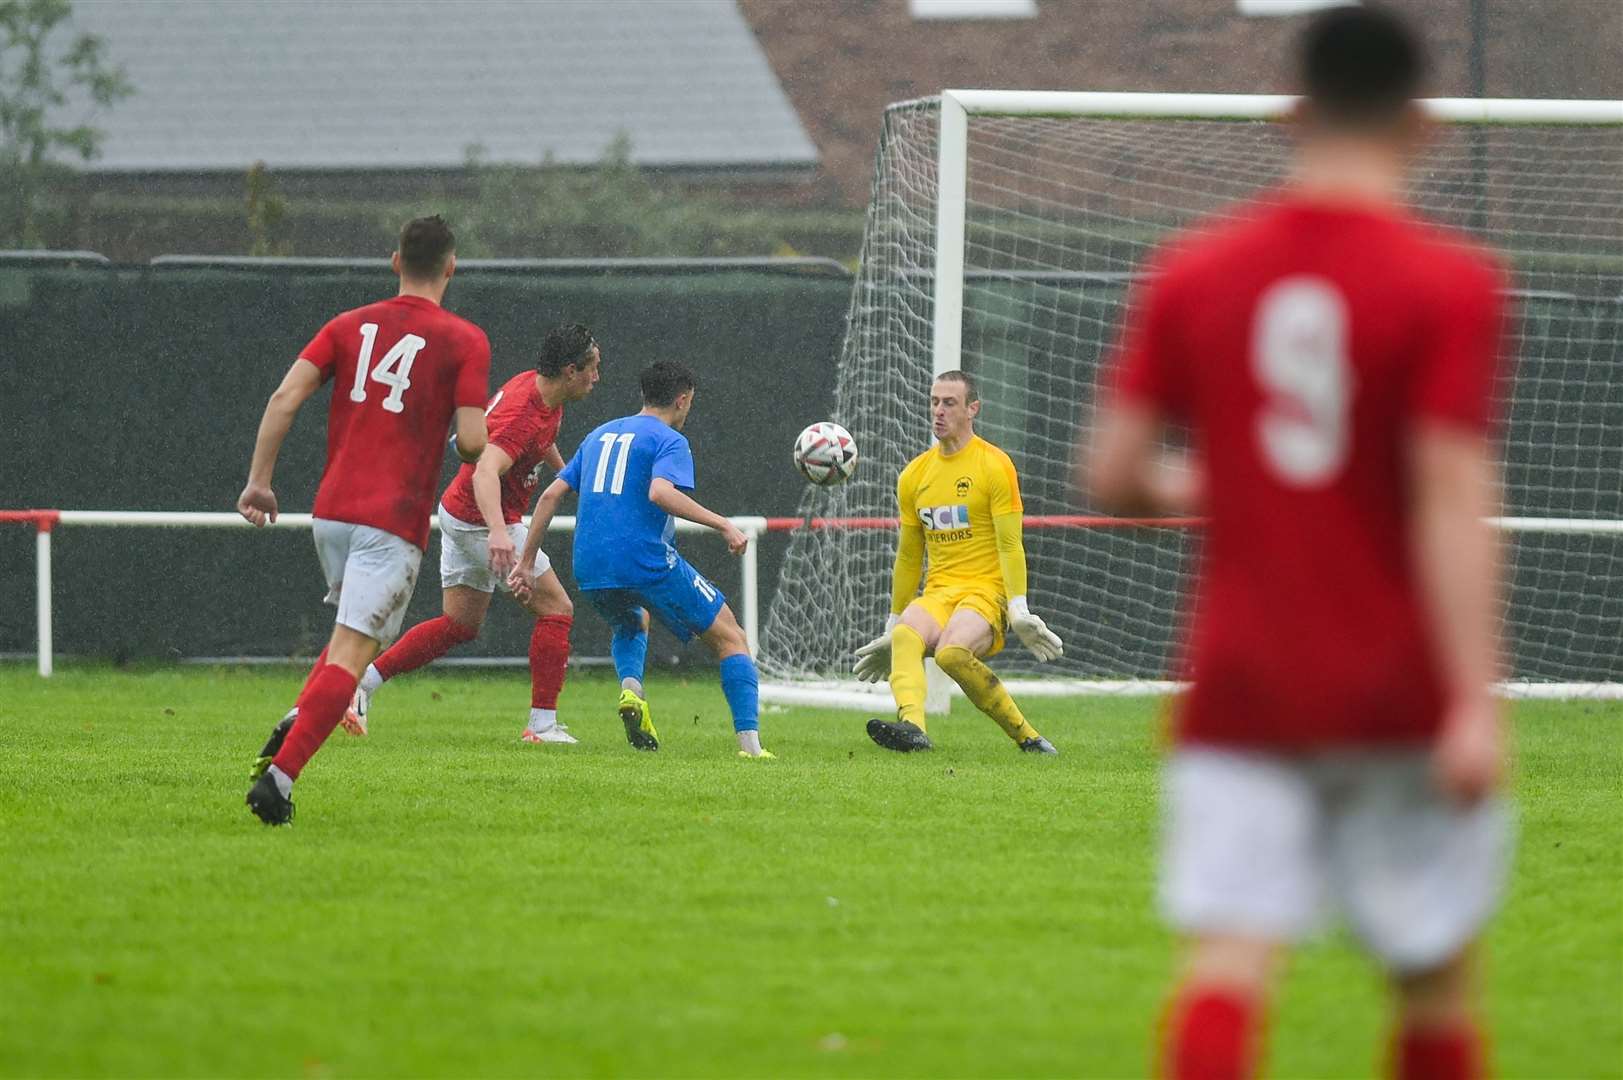 Downham's Duncan McAnally made a great save early in the second half. Picture: Ian Burt